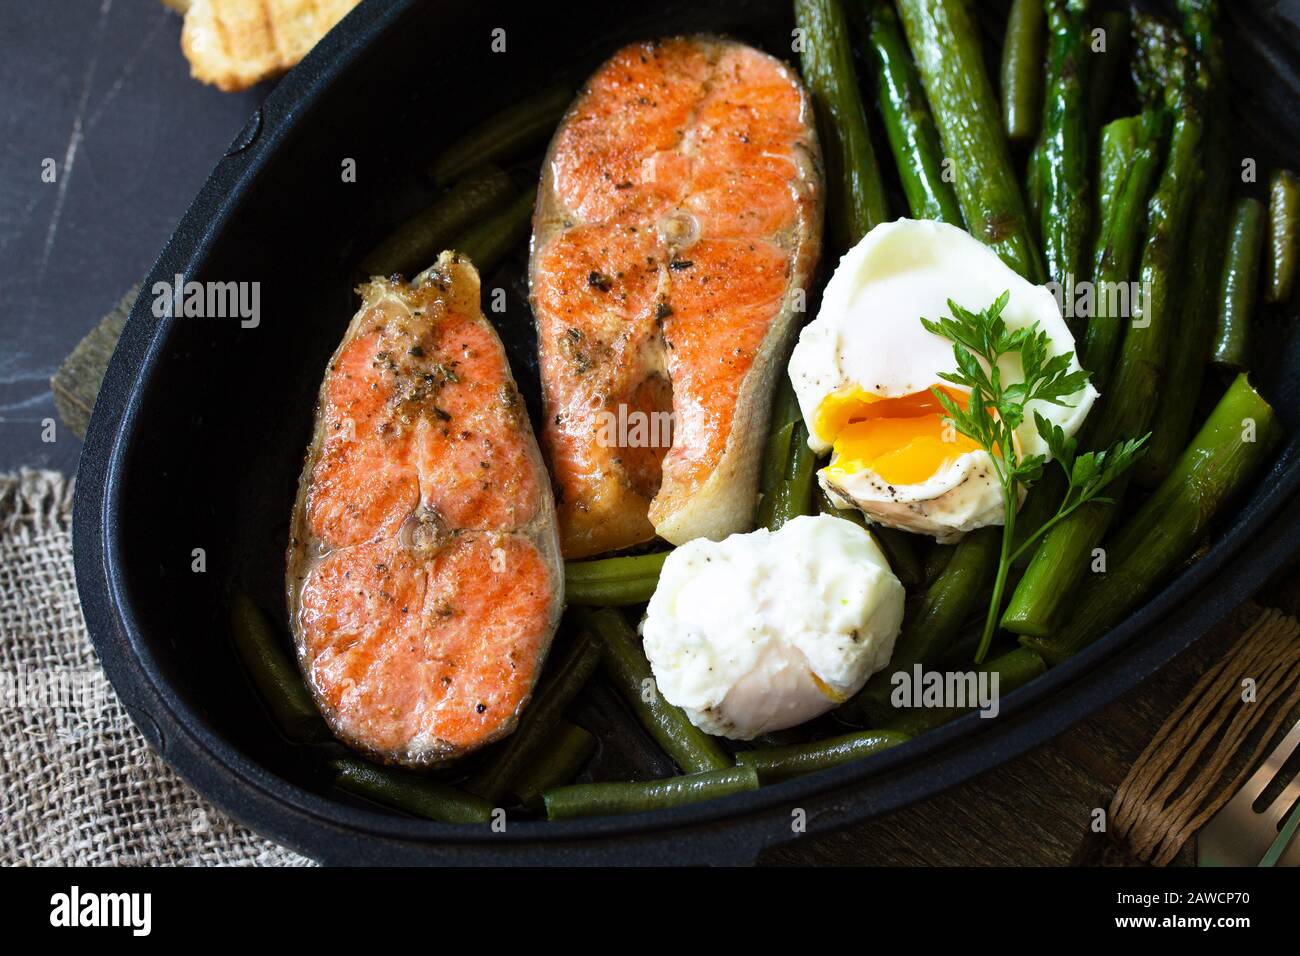 Green asparagus, grilled salmon and poached eggs. Healthy food on rustic wooden background. Stock Photo